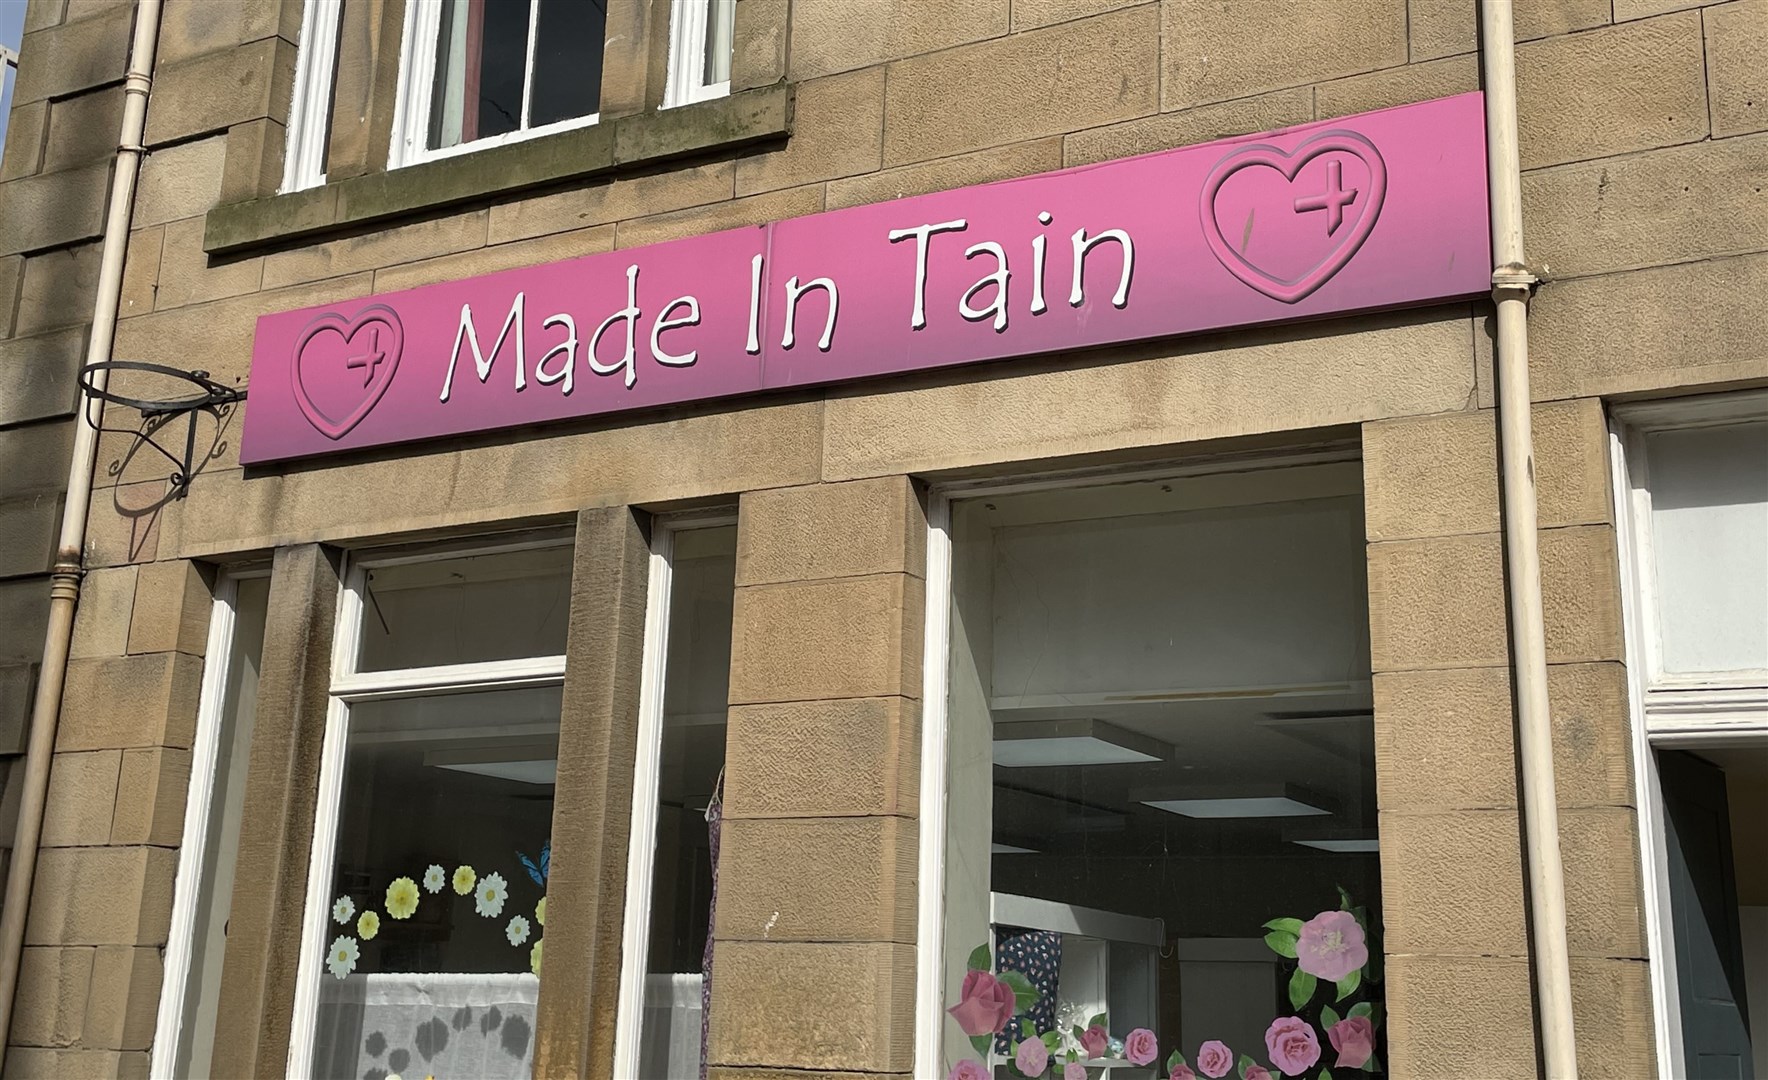 Made in Tain first opened its doors in 2013.